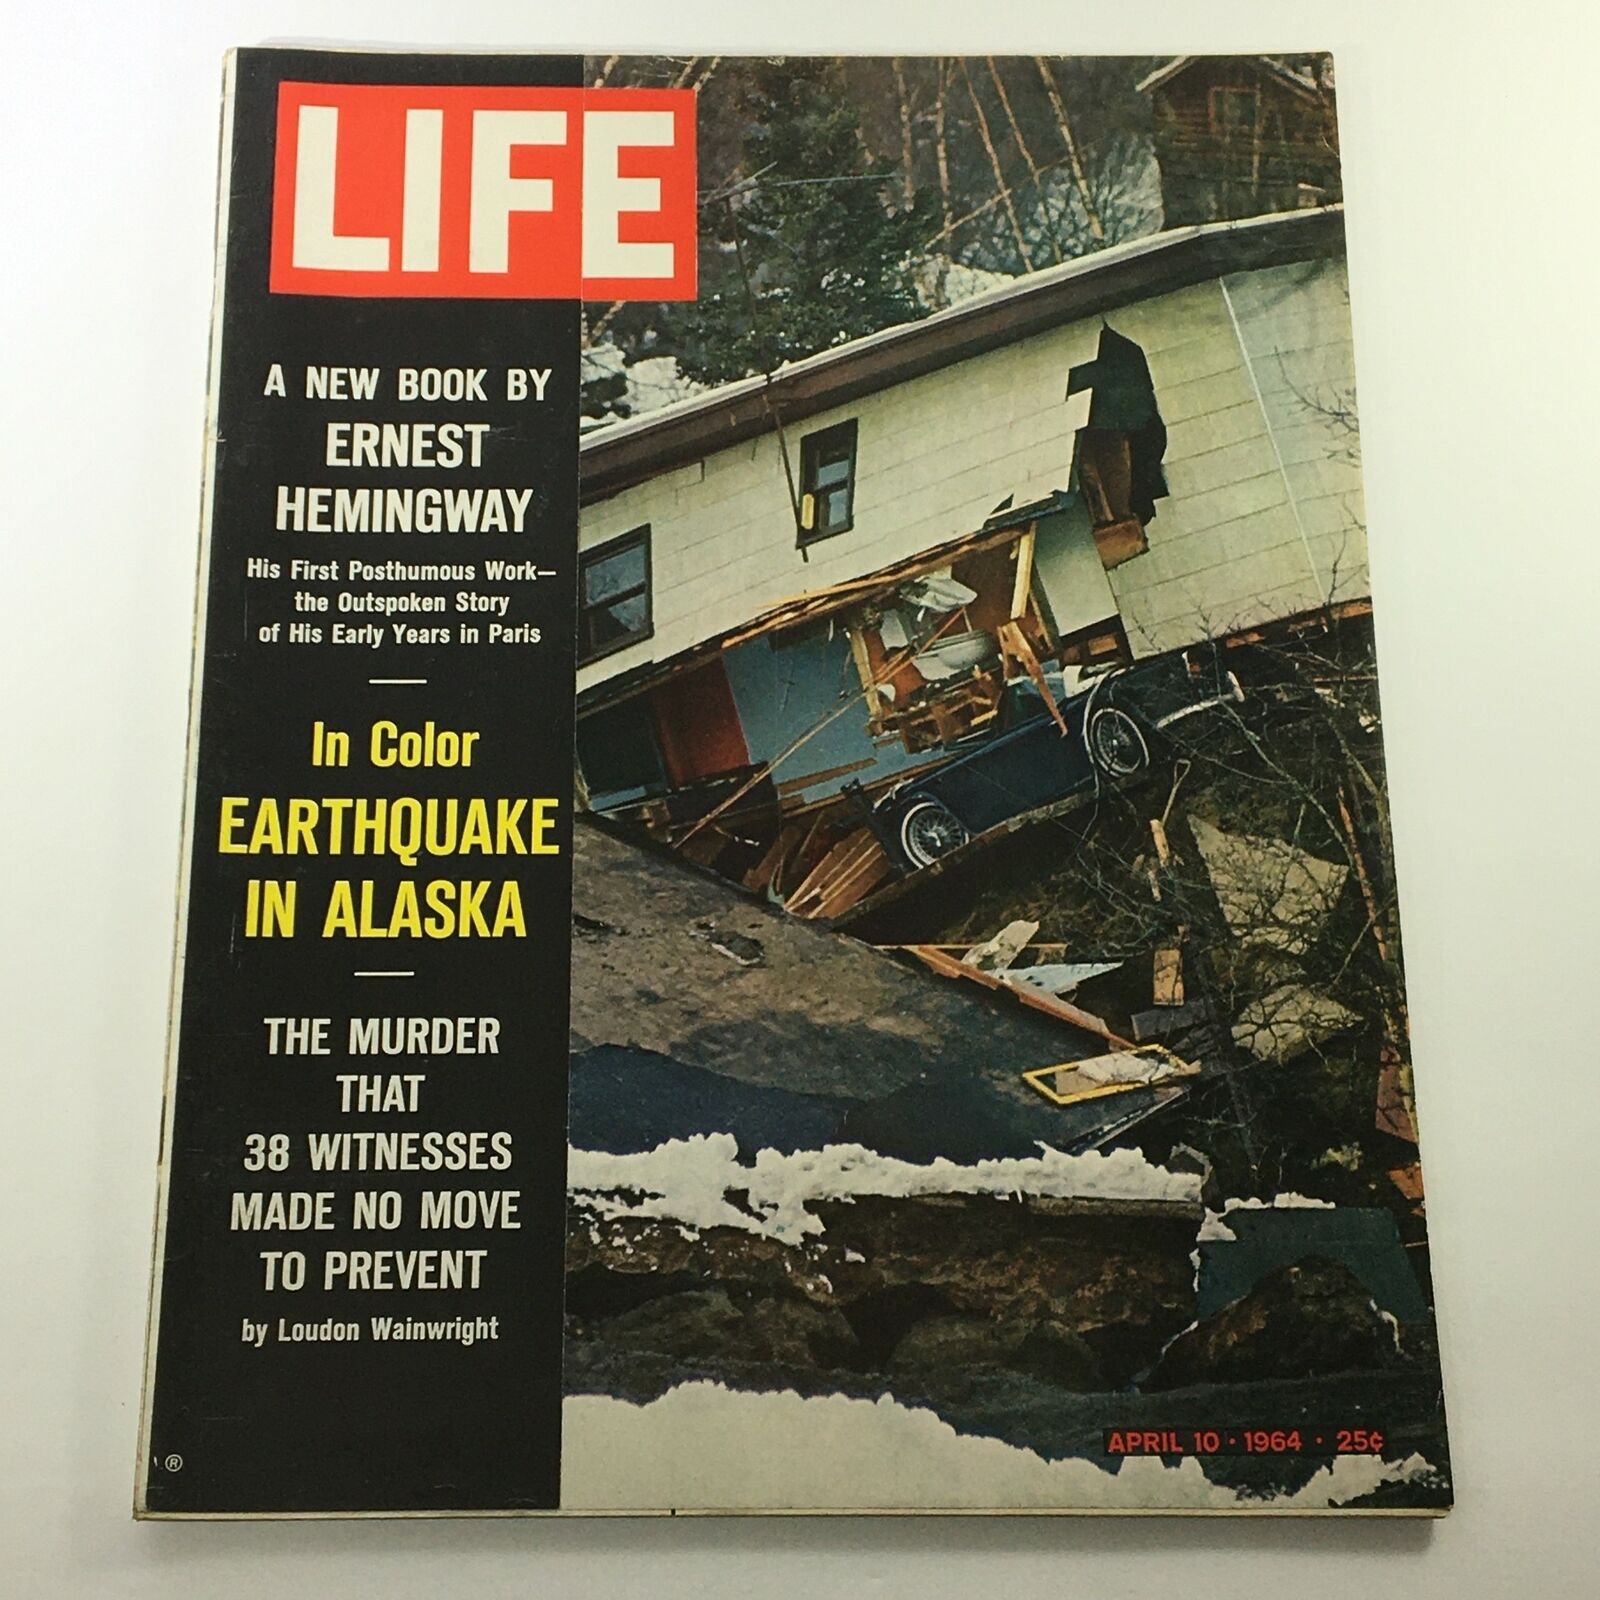 VTG Life Magazine April 10 1964 Earthquake in Alaska Cover Feature, Newsstand